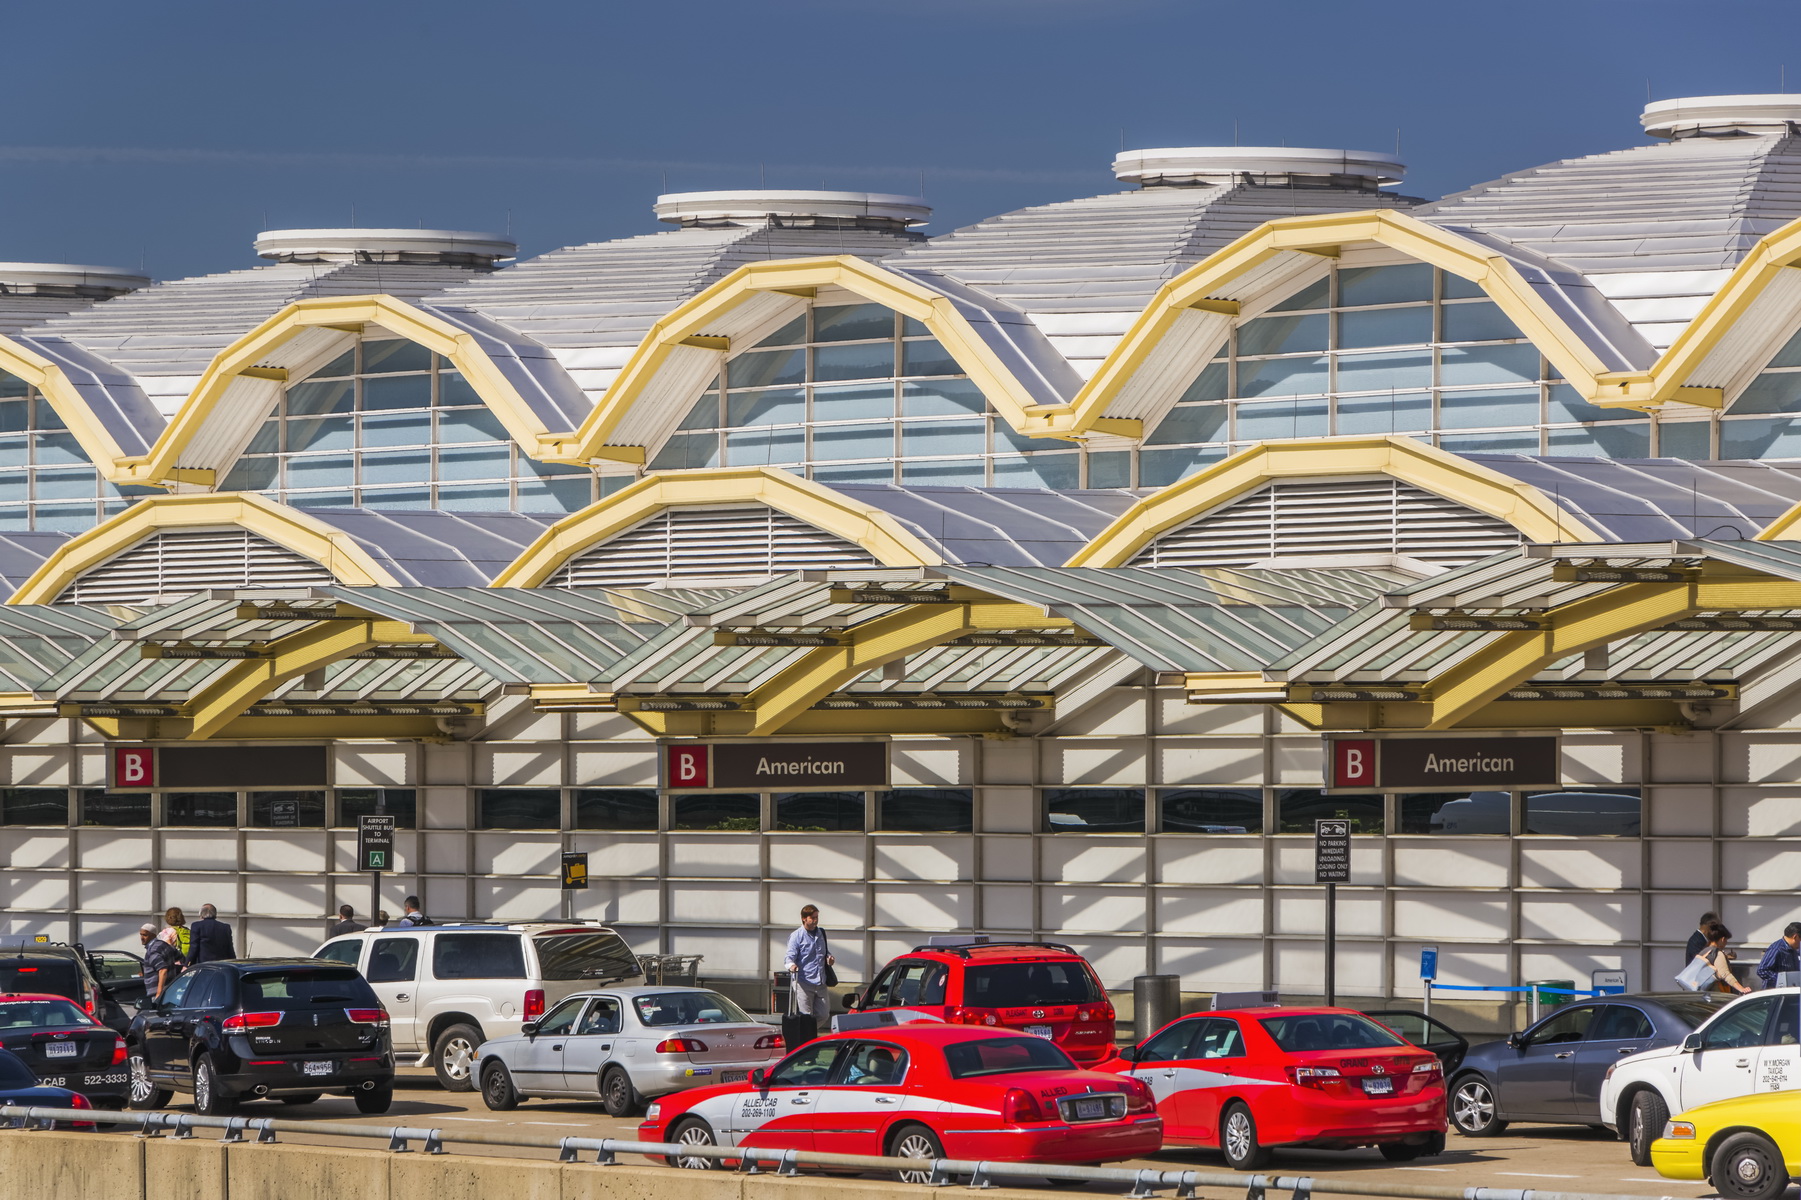 exterior of an airport with domes on the facade